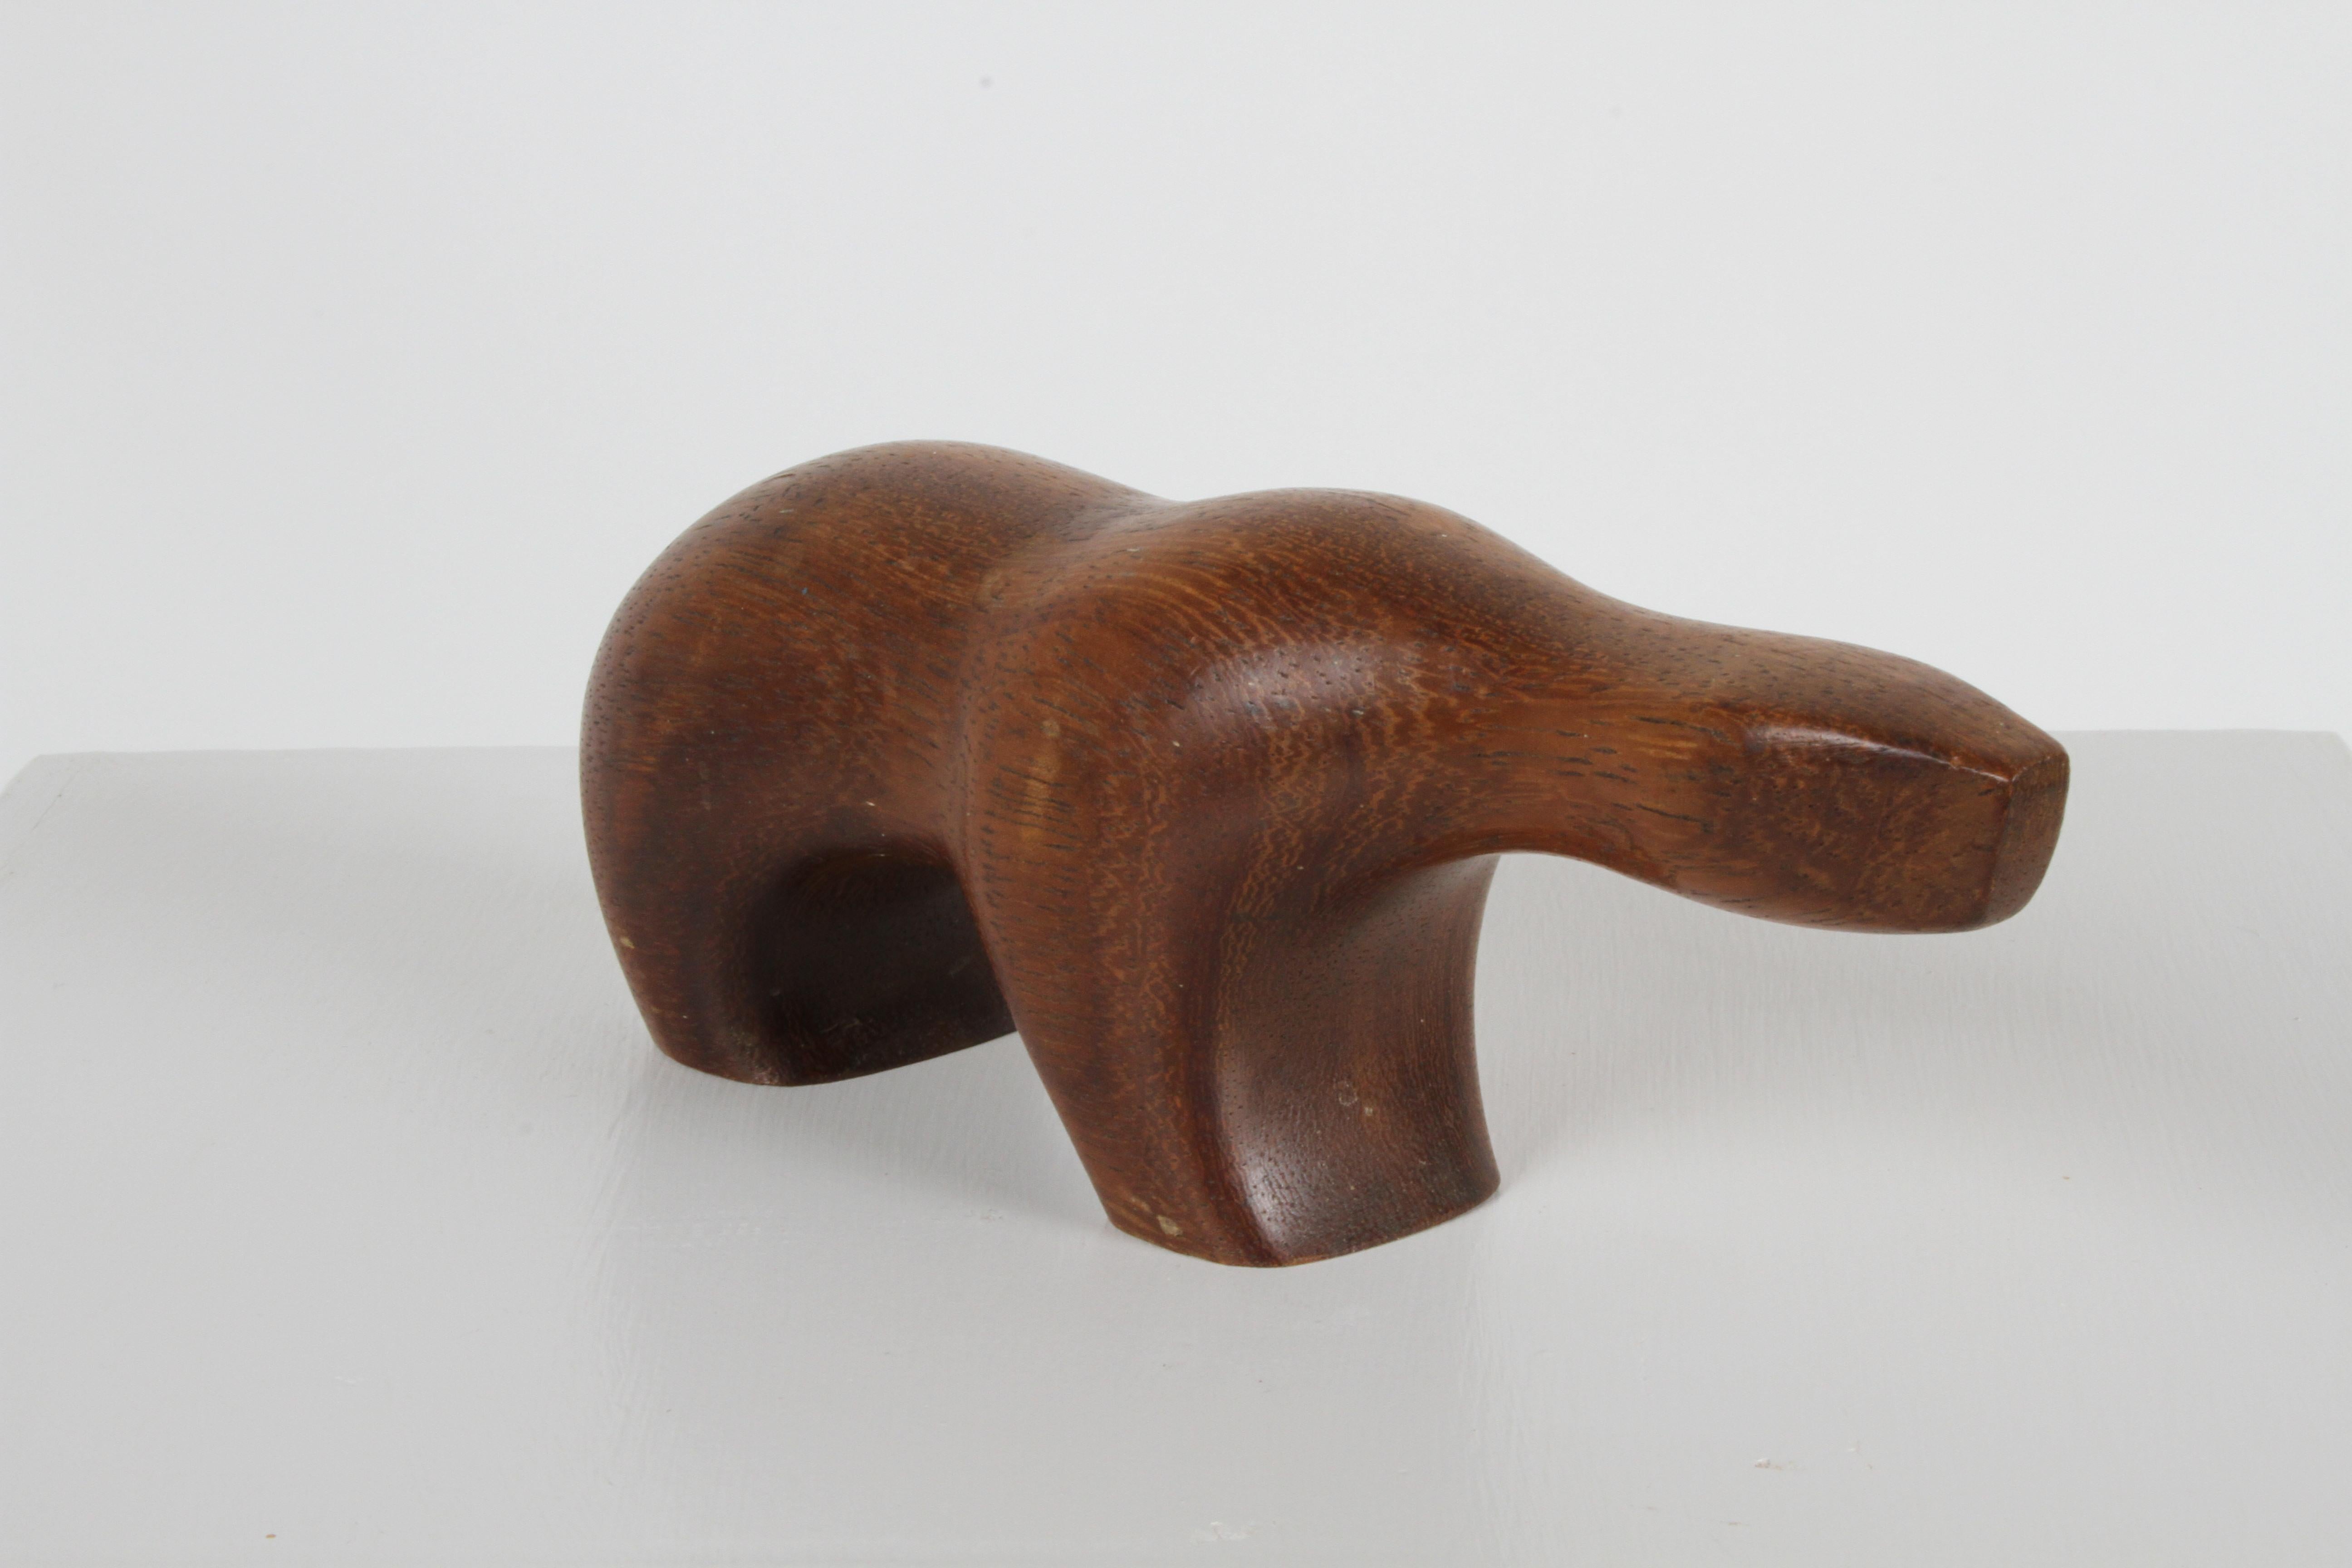 Arne Tjomsland Scandinavian Mid-Century Modern carved teak Polar Bear sculpture , marked Norway. The polar bear was the first animal he carved in the 1950s. In fine condition original condition, just needs some teak oil. 

Arne received a Gold